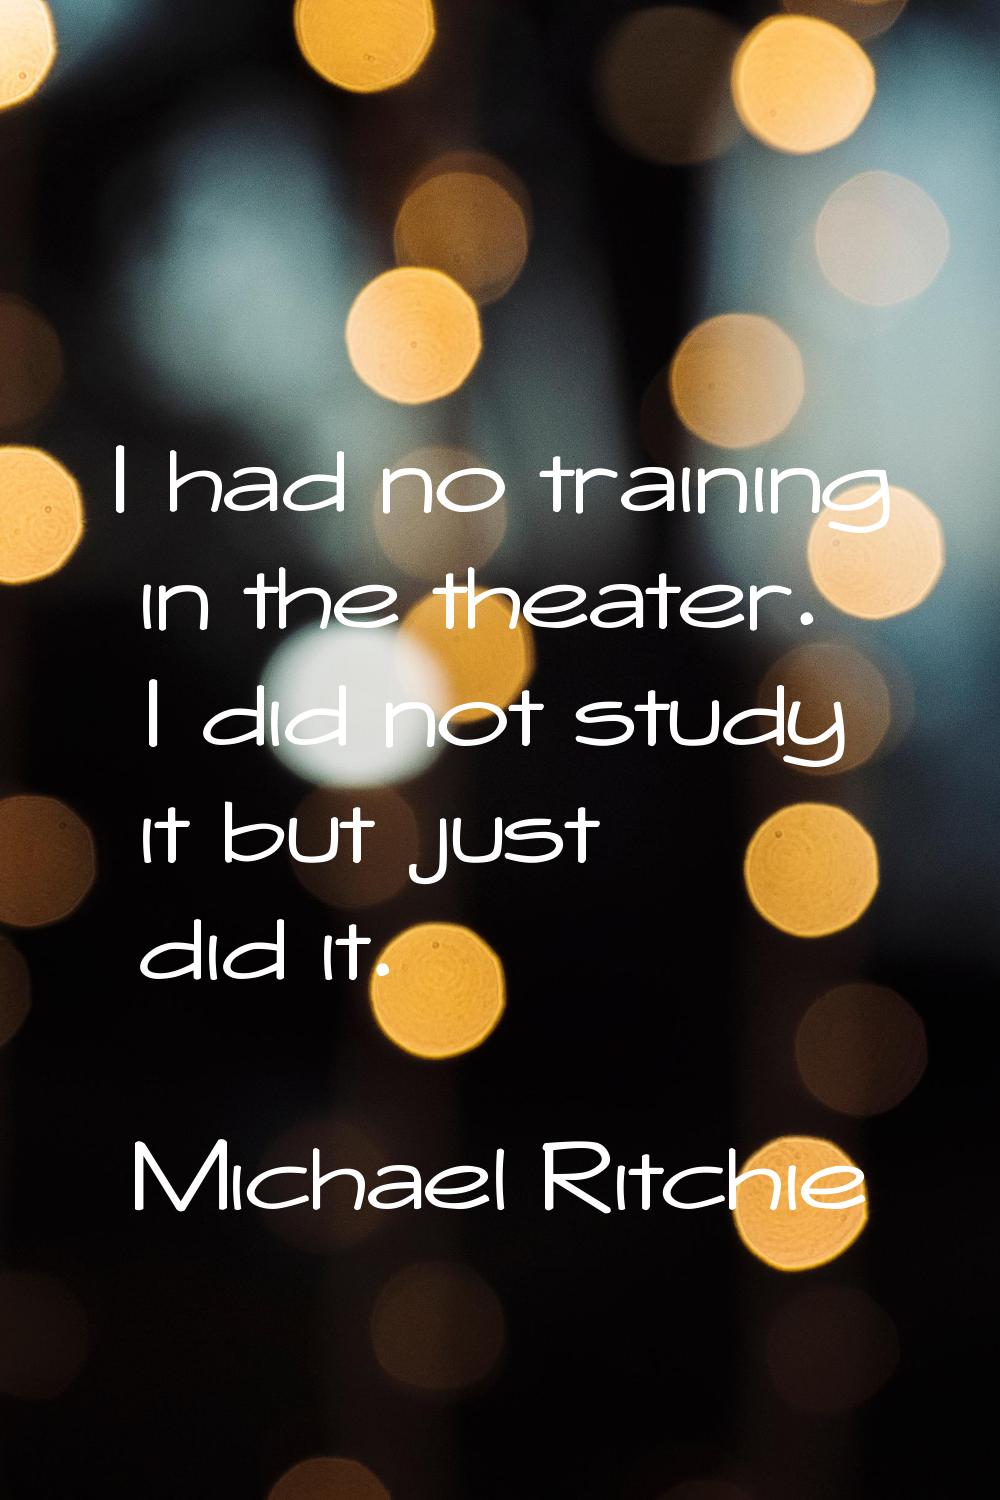 I had no training in the theater. I did not study it but just did it.